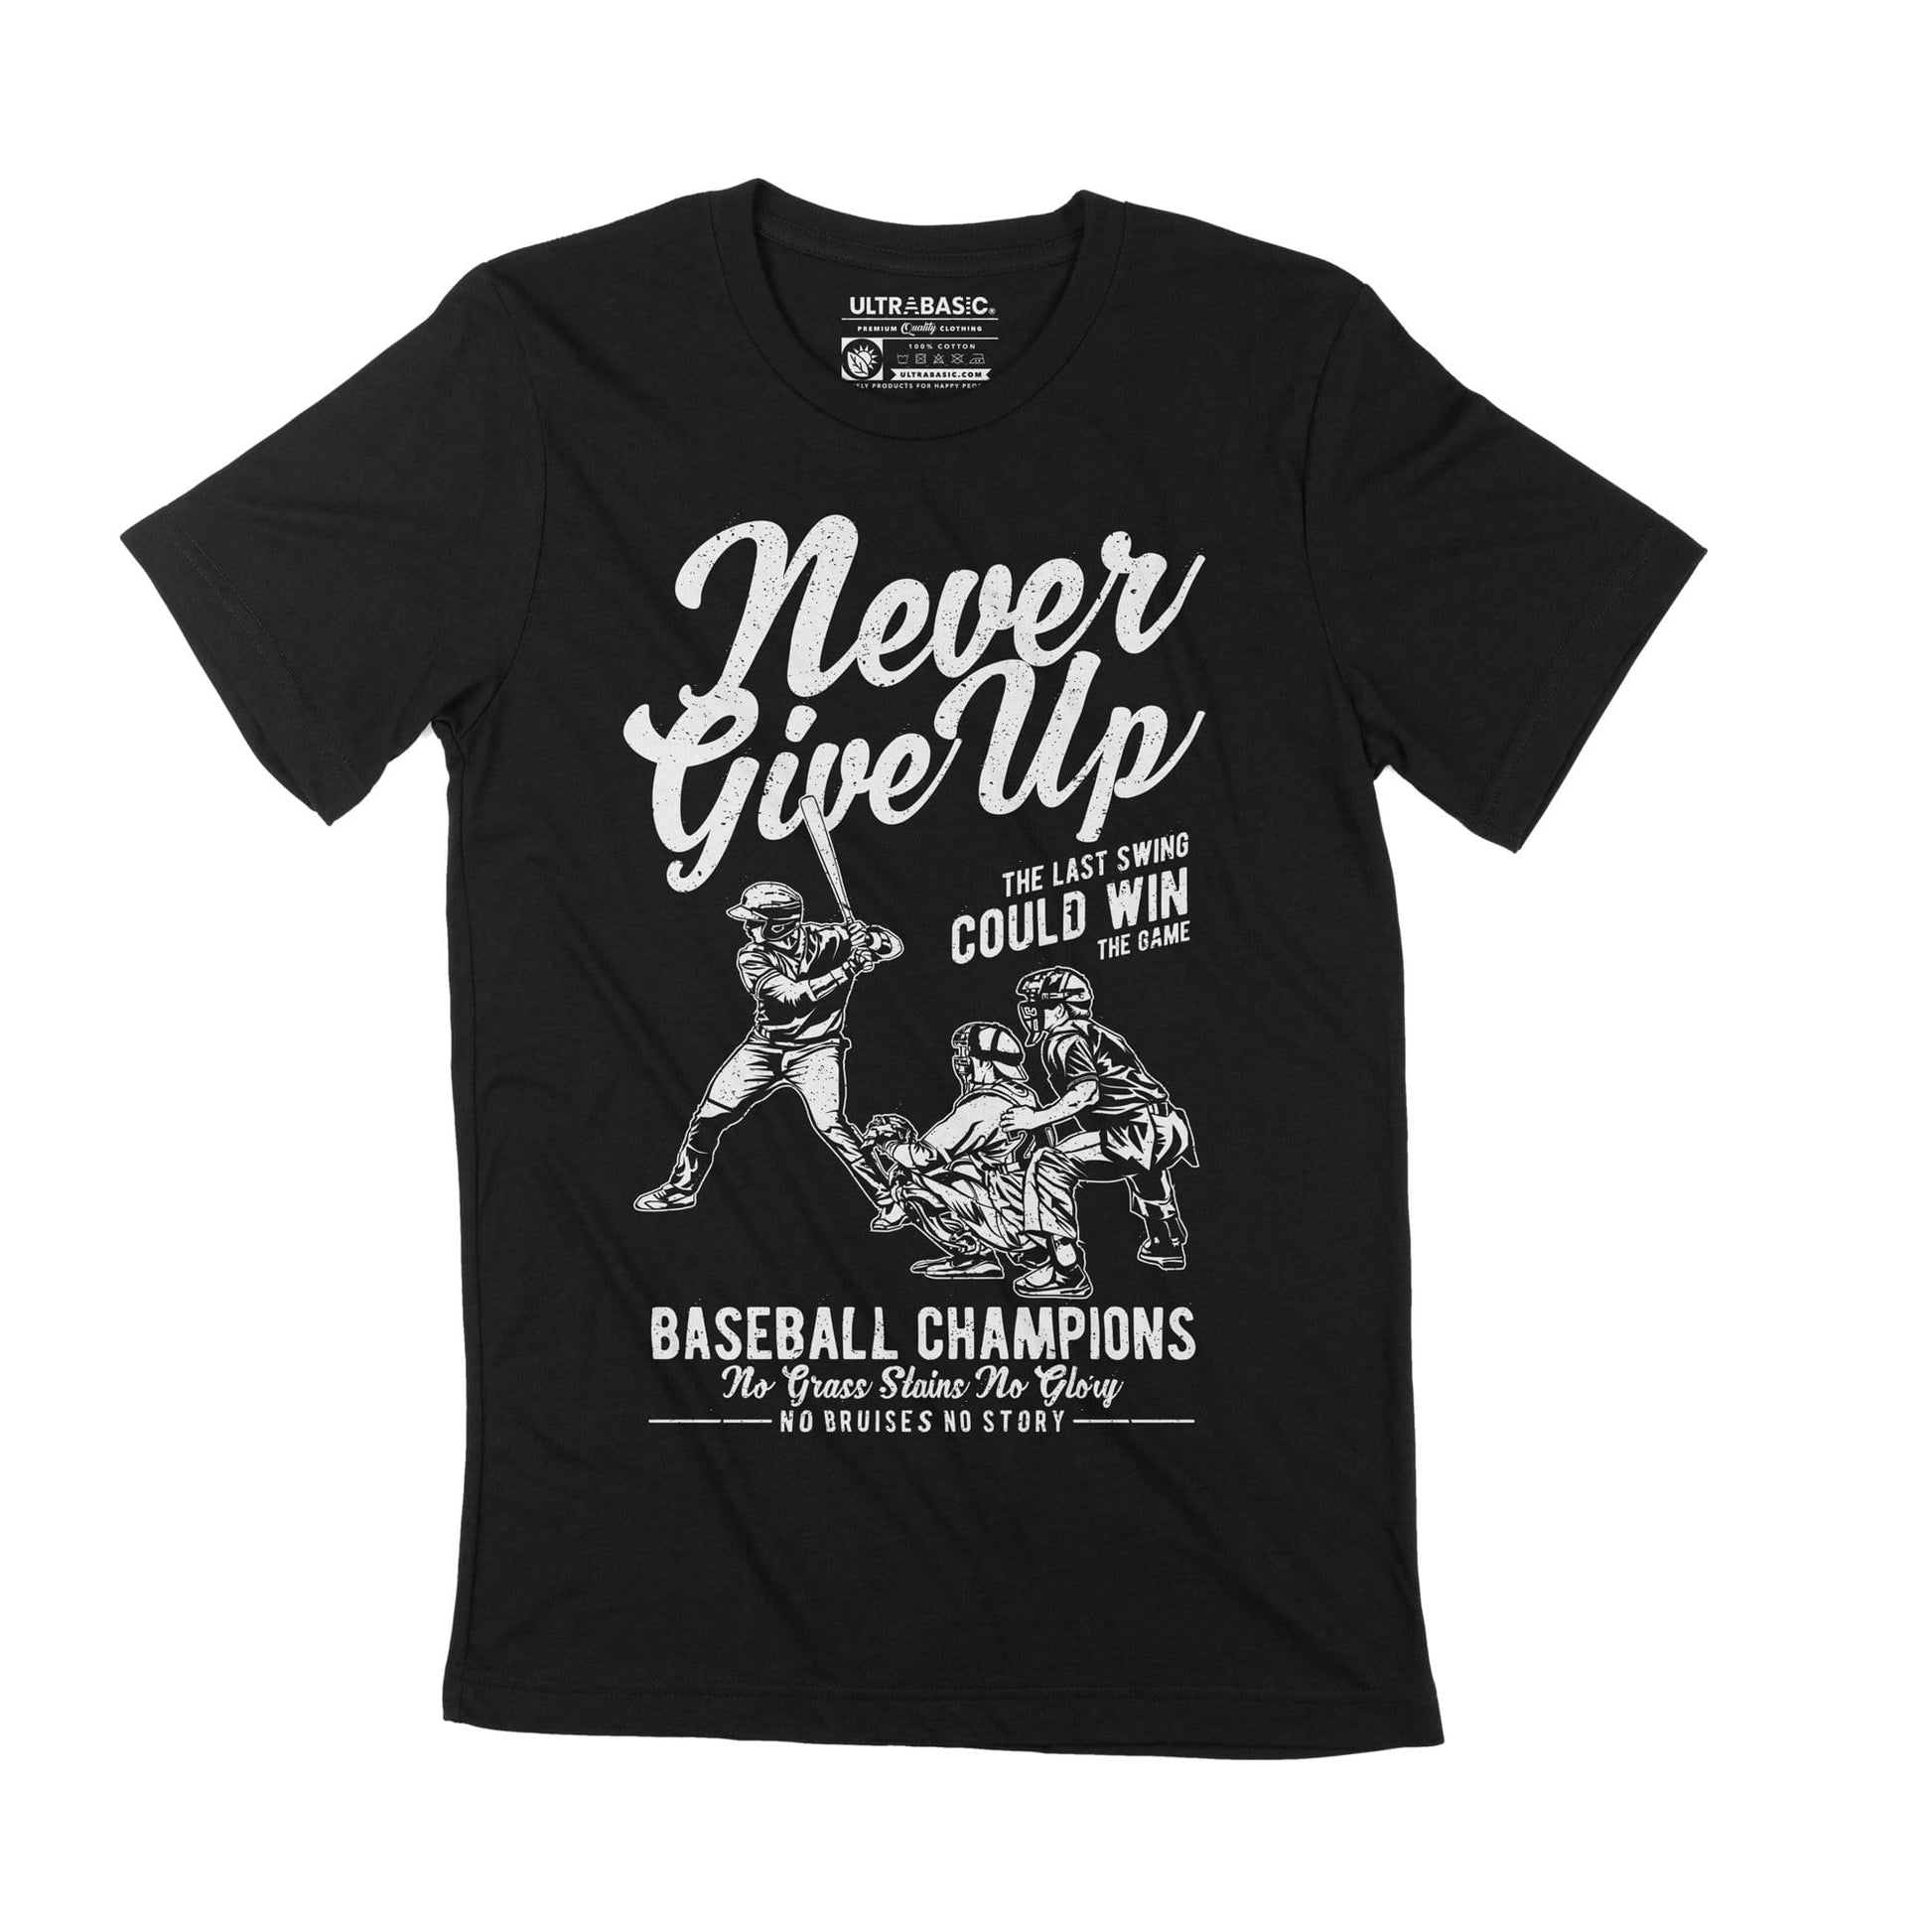 ULTRABASIC Never Give Up Men's T-Shirt - Baseball Championship Vintage Graphic Tee  baseballism practice catcher softball adult cleveland indians catchers youth ideas merch present fathers day tshirts apparel merchandise letter clothing womens christmas novelty unisex classic teens casual print outdoor sport love clothes coach 